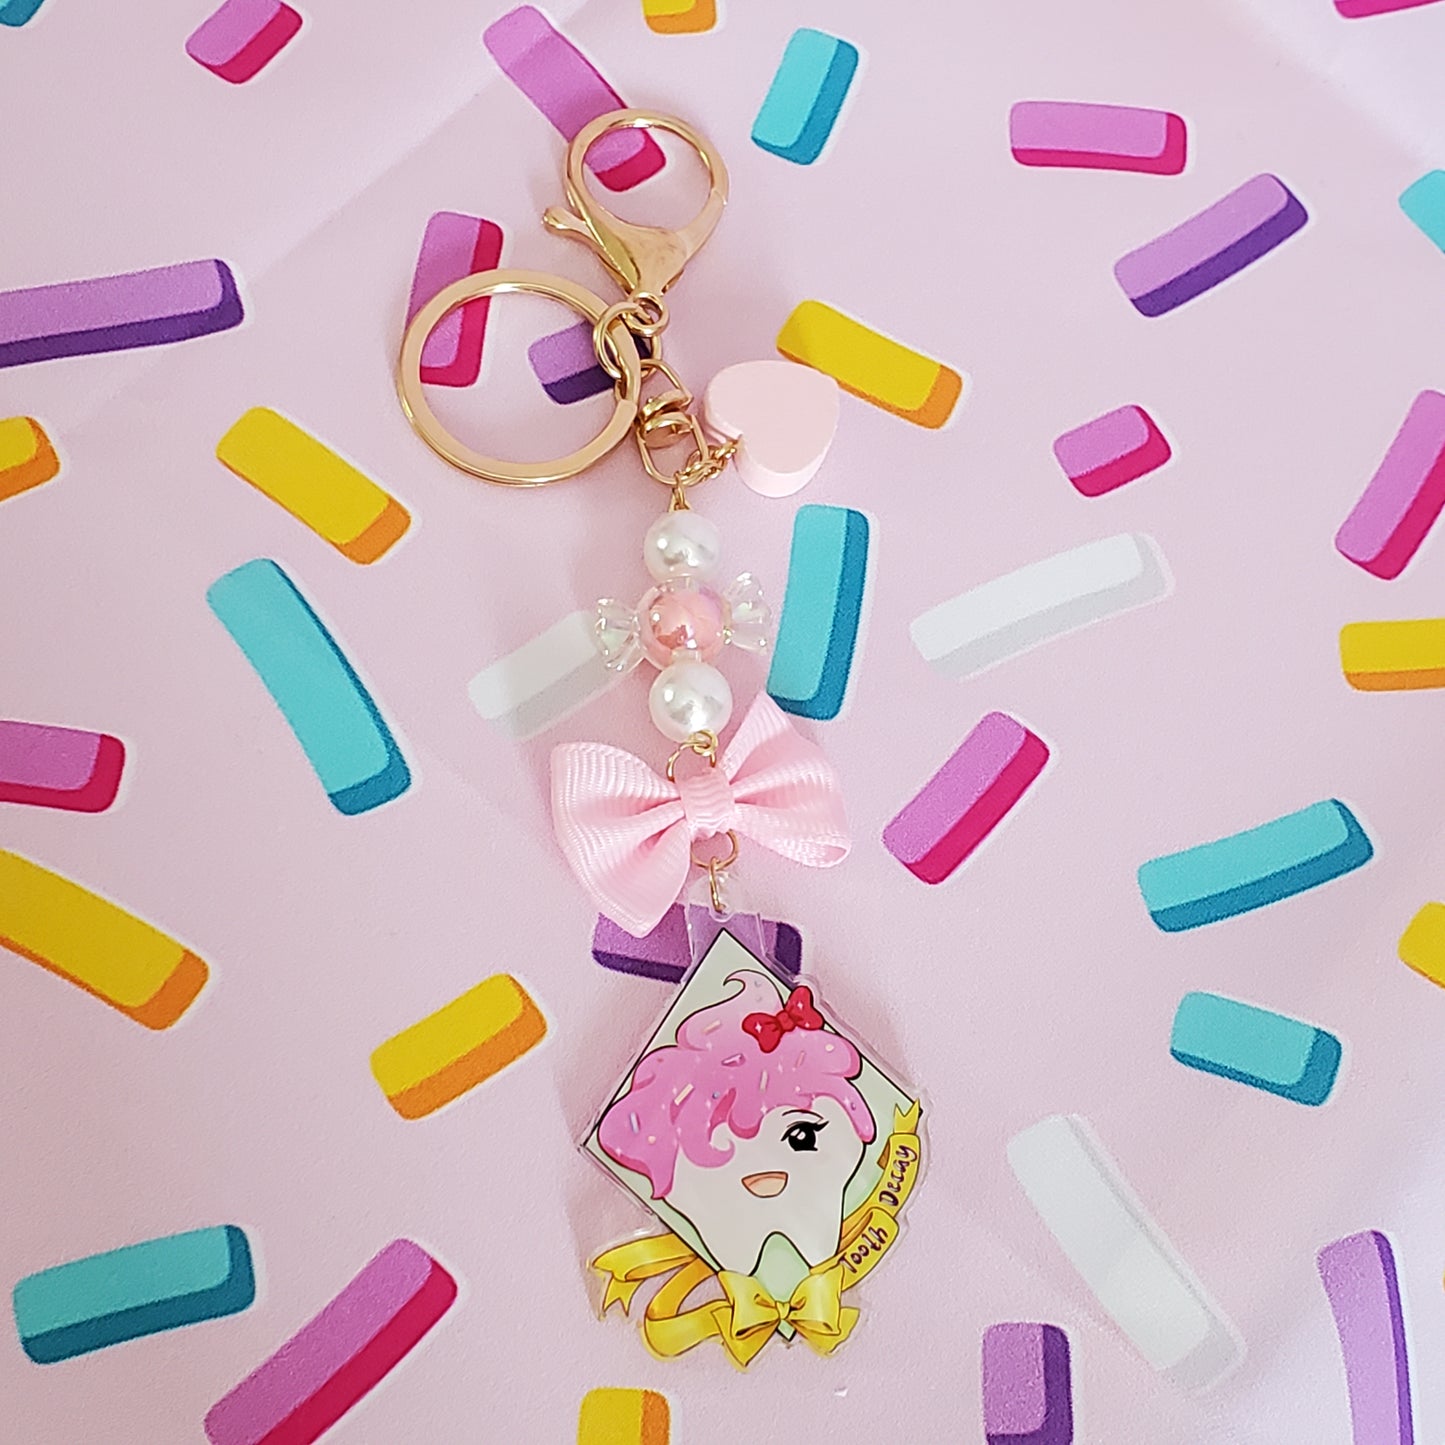 Tooth Decay Keychain